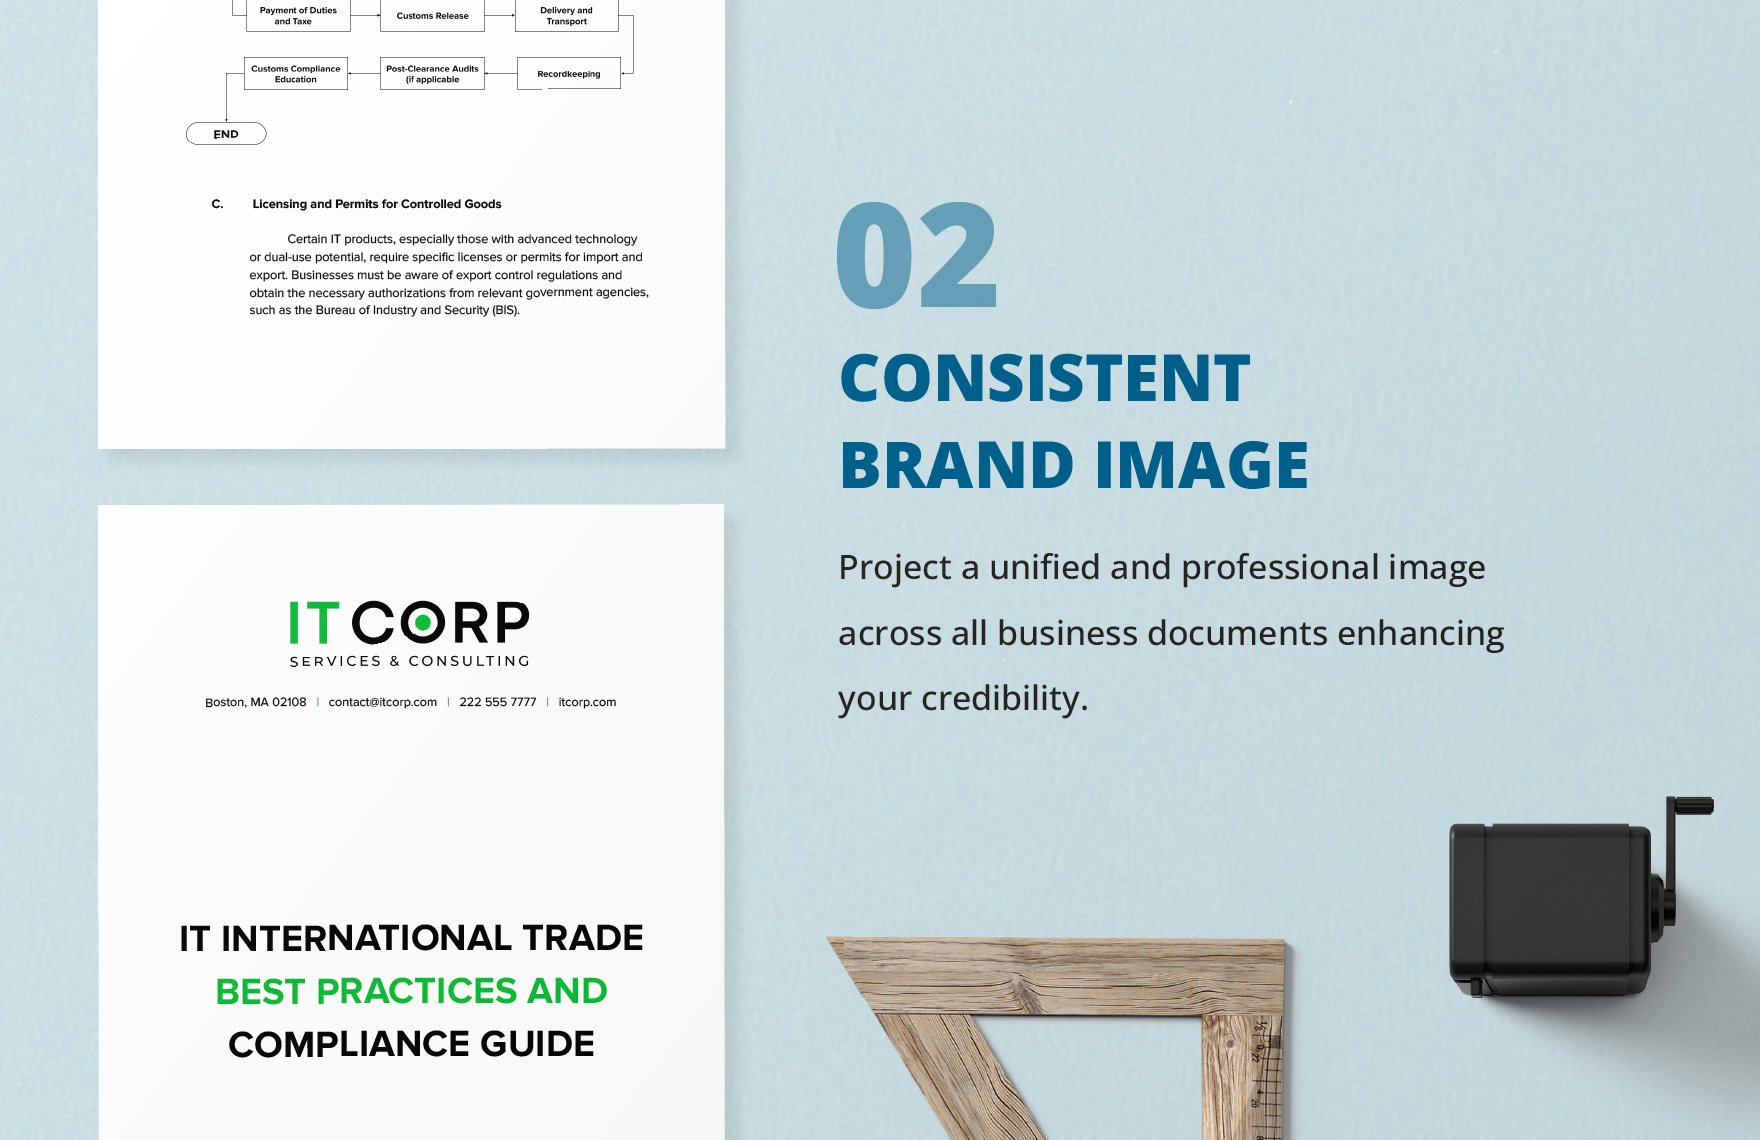 IT International Trade Best Practices and Compliance Guide Template